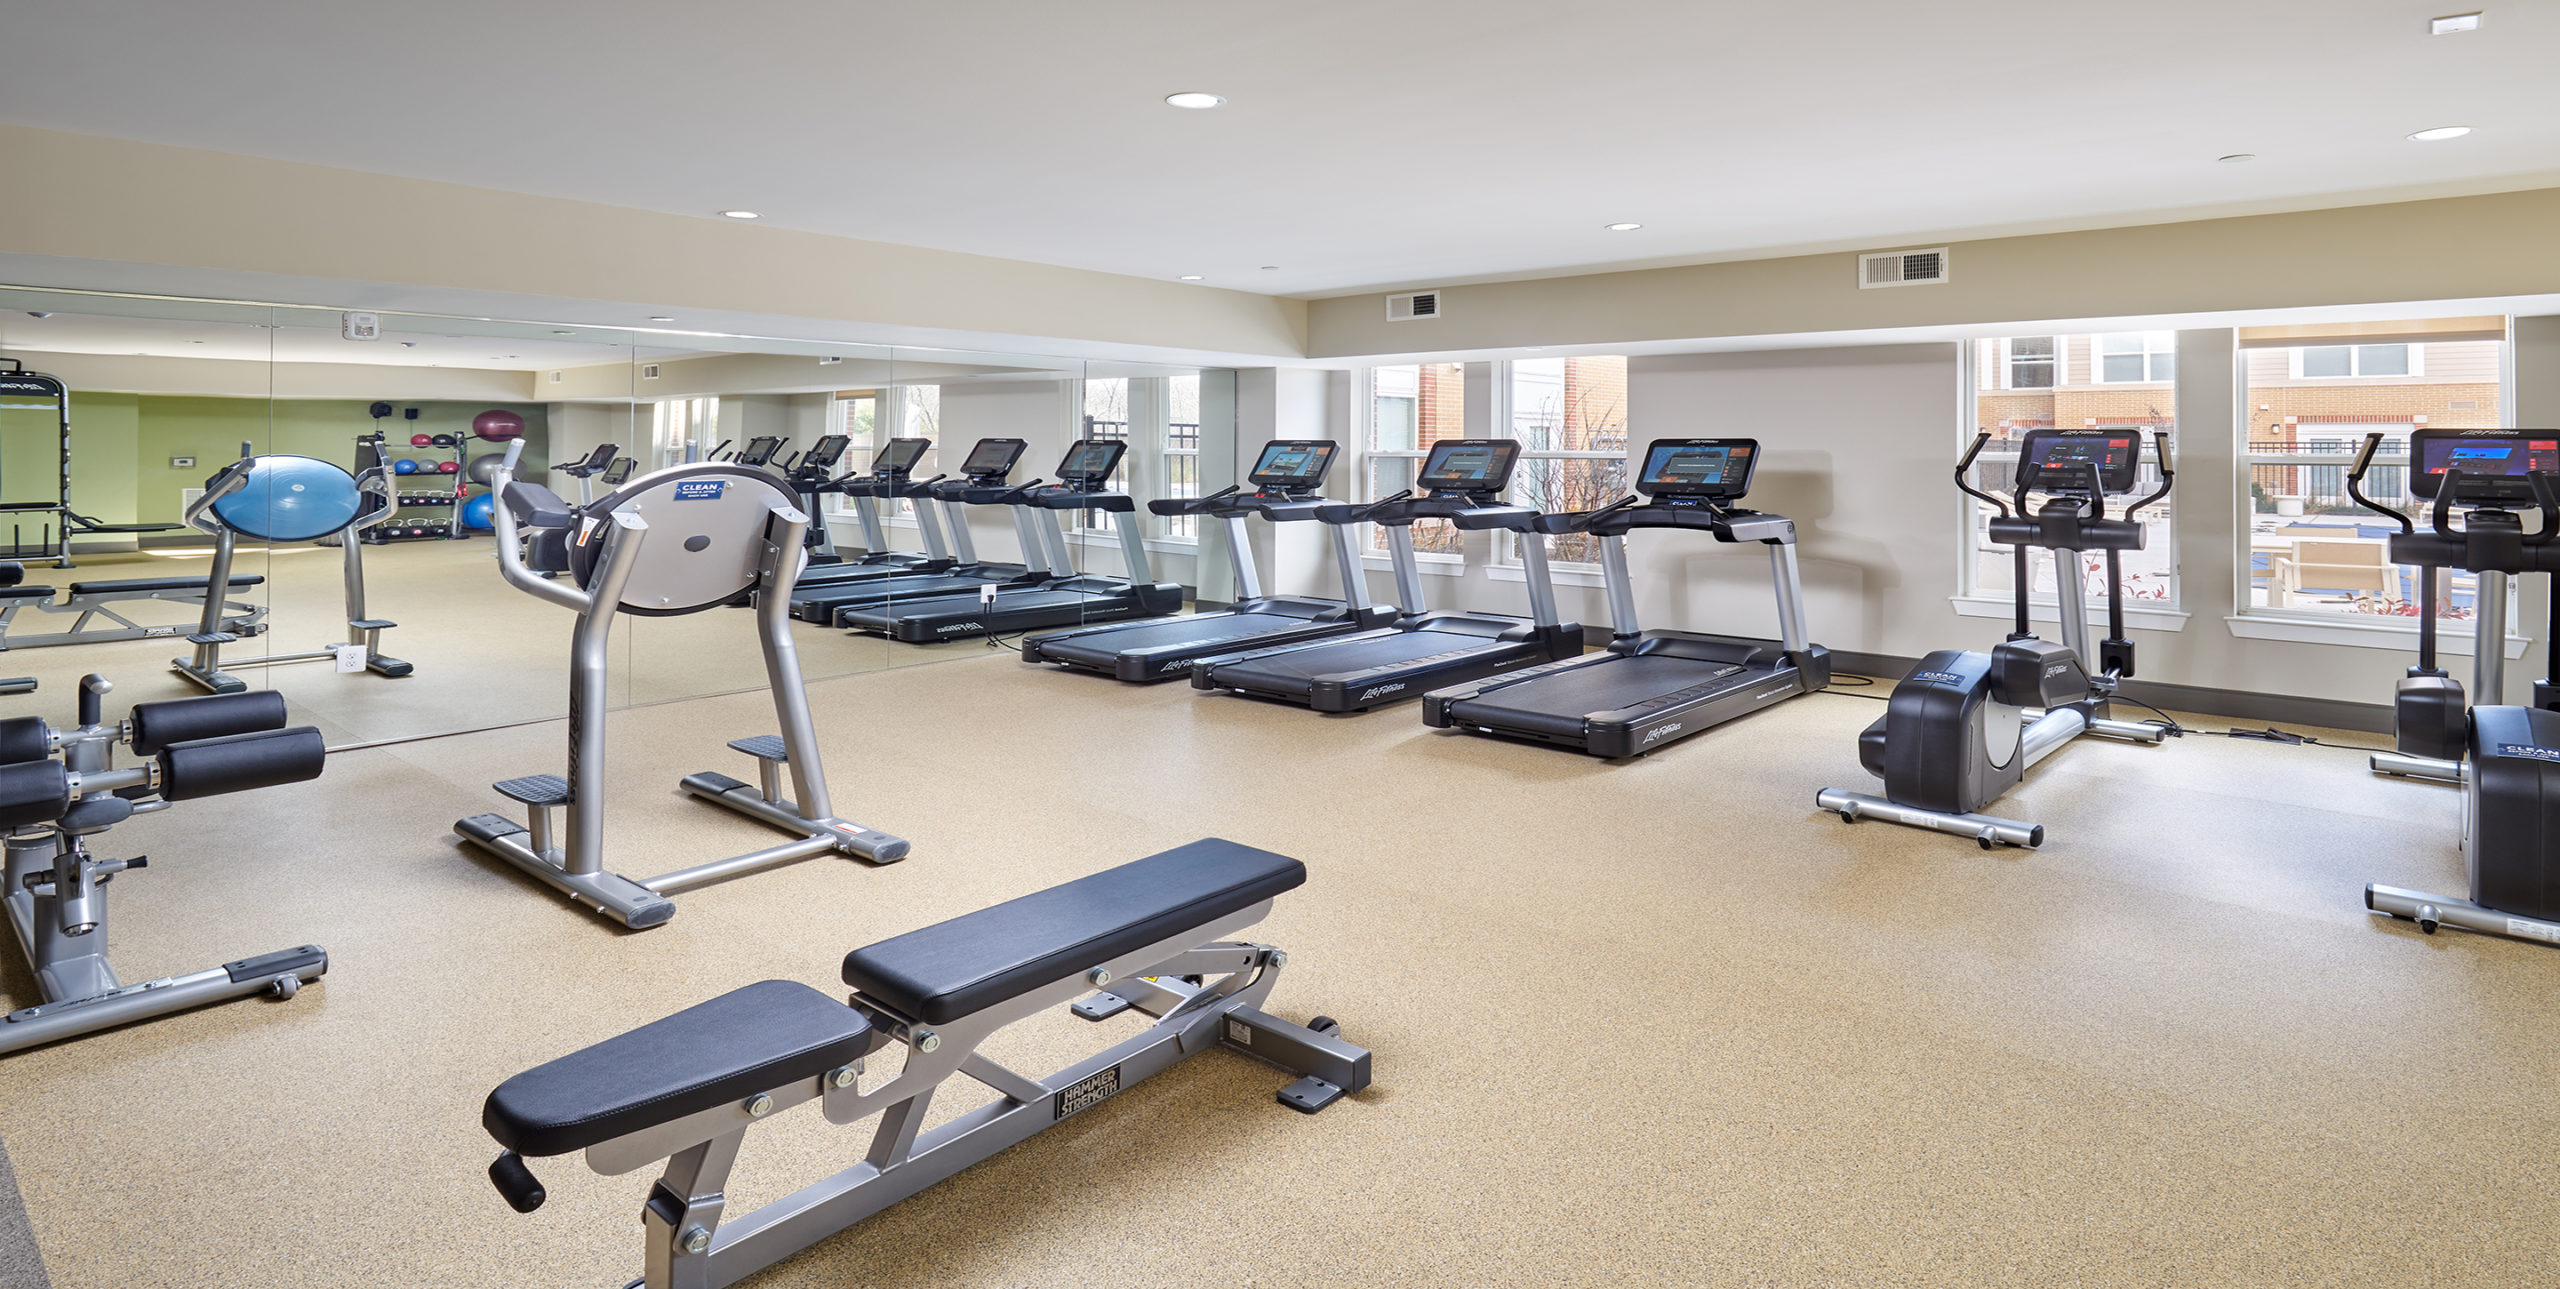 Treadmills, ellipticals, and other gym equipment inside the fitness center at The Jameson in Kincora, Virginia